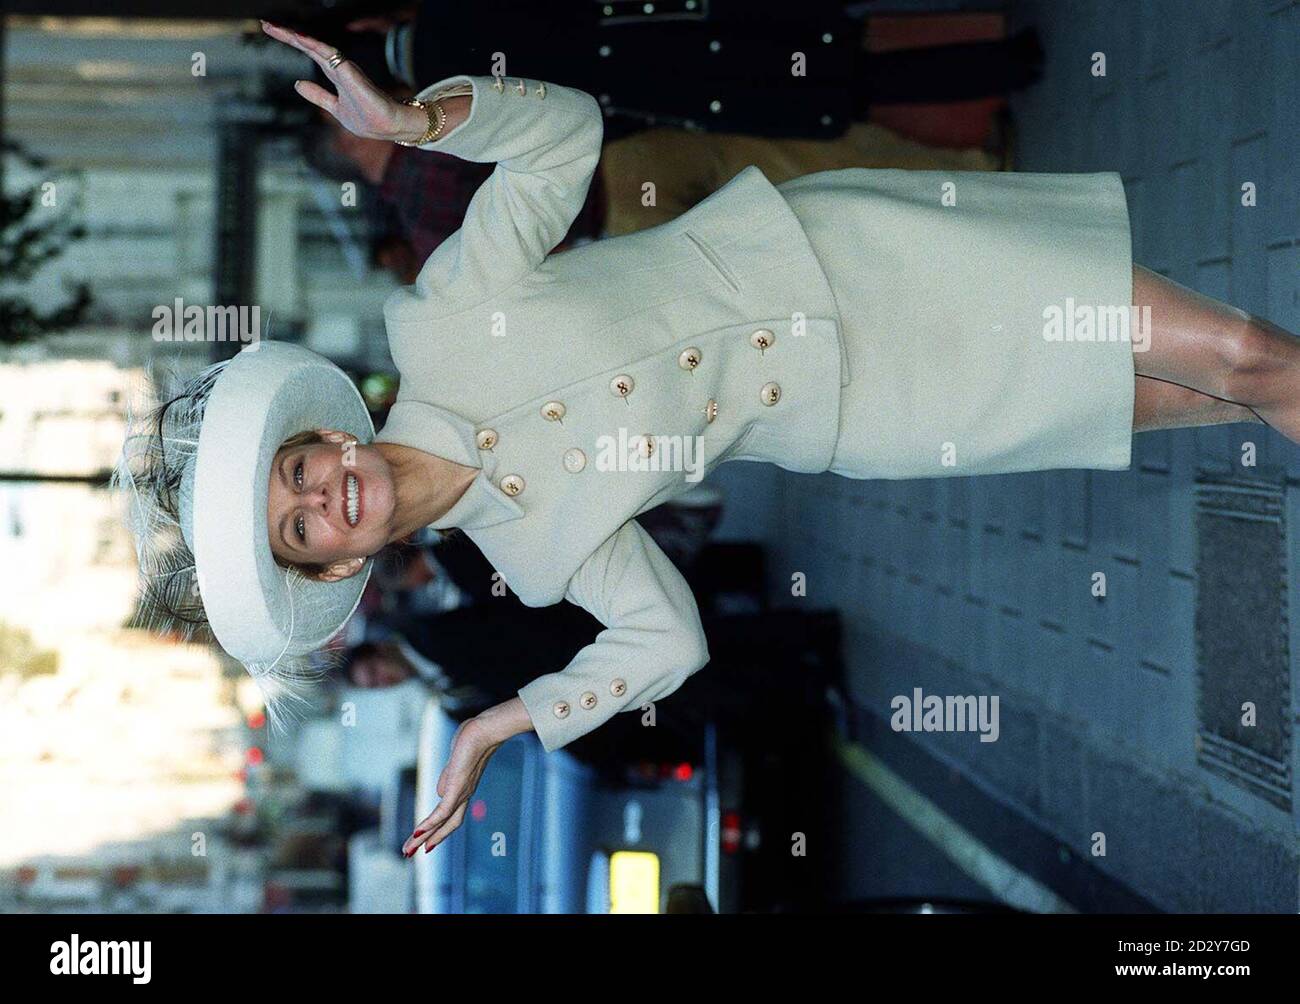 Jilly Johnson, model and author dons a Herbert Johnson hat as she arrives for the charity 'Mad Hatter's Tea Party' at Claridges, London, a fundraising event for the Scientific Exploration Society, today (Wednesday). Photograph by Ben Curtis /PA. Stock Photo